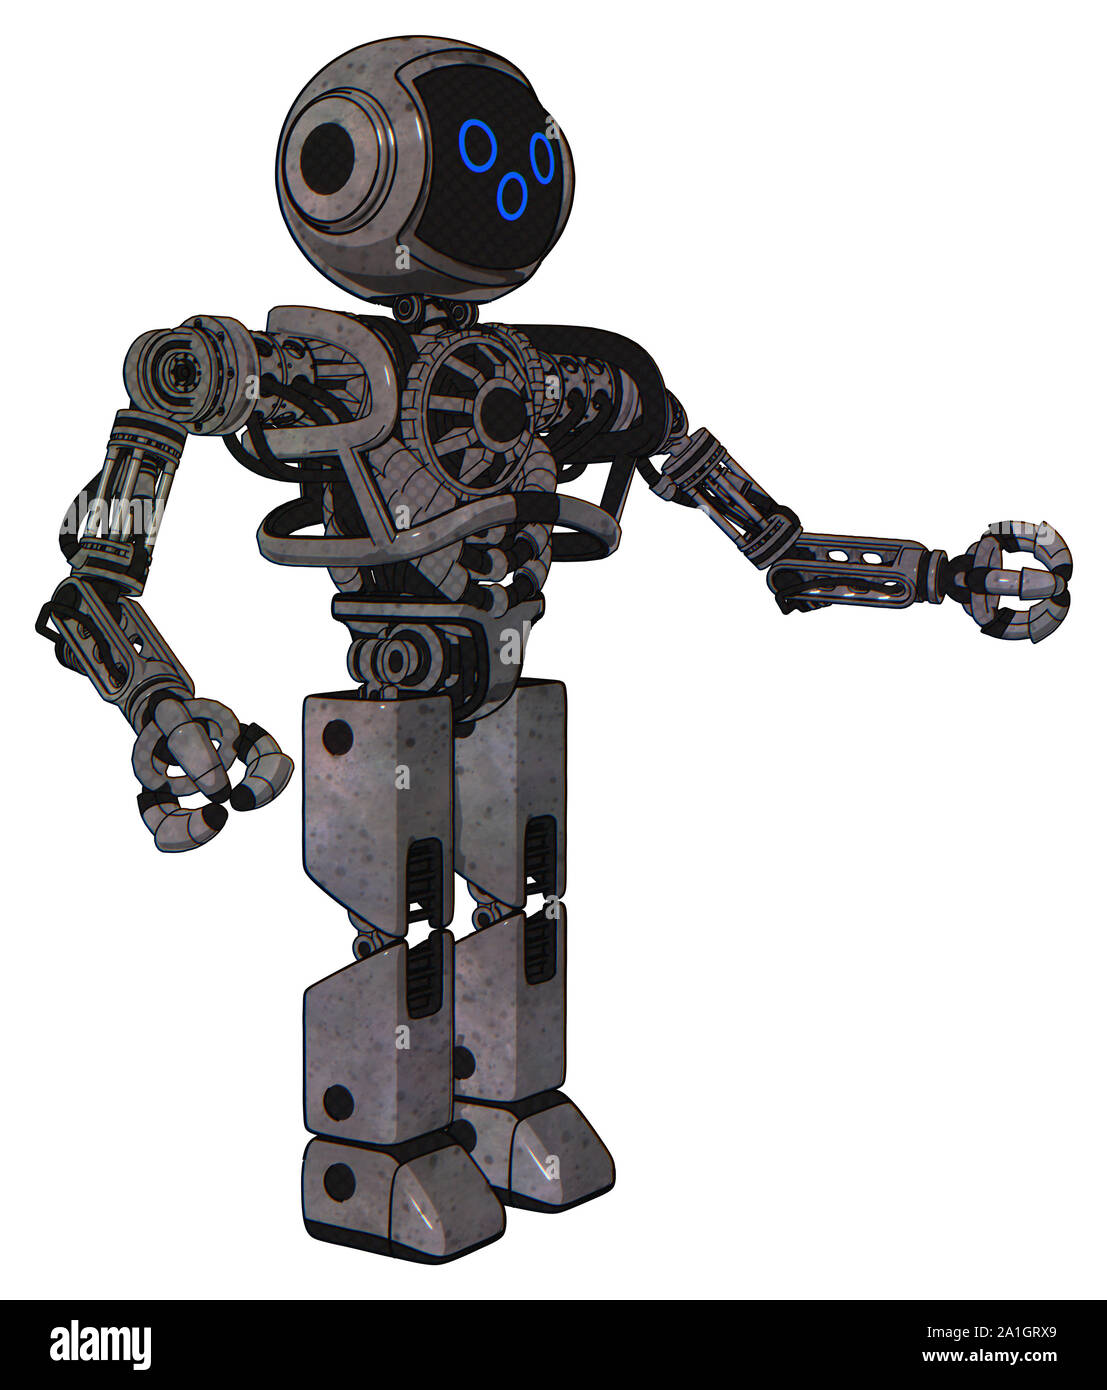 Robot containing elements: digital display expression, heavy upper chest, chest plating, prototype exoplate legs. Material: Unpainted met Stock Photo Alamy